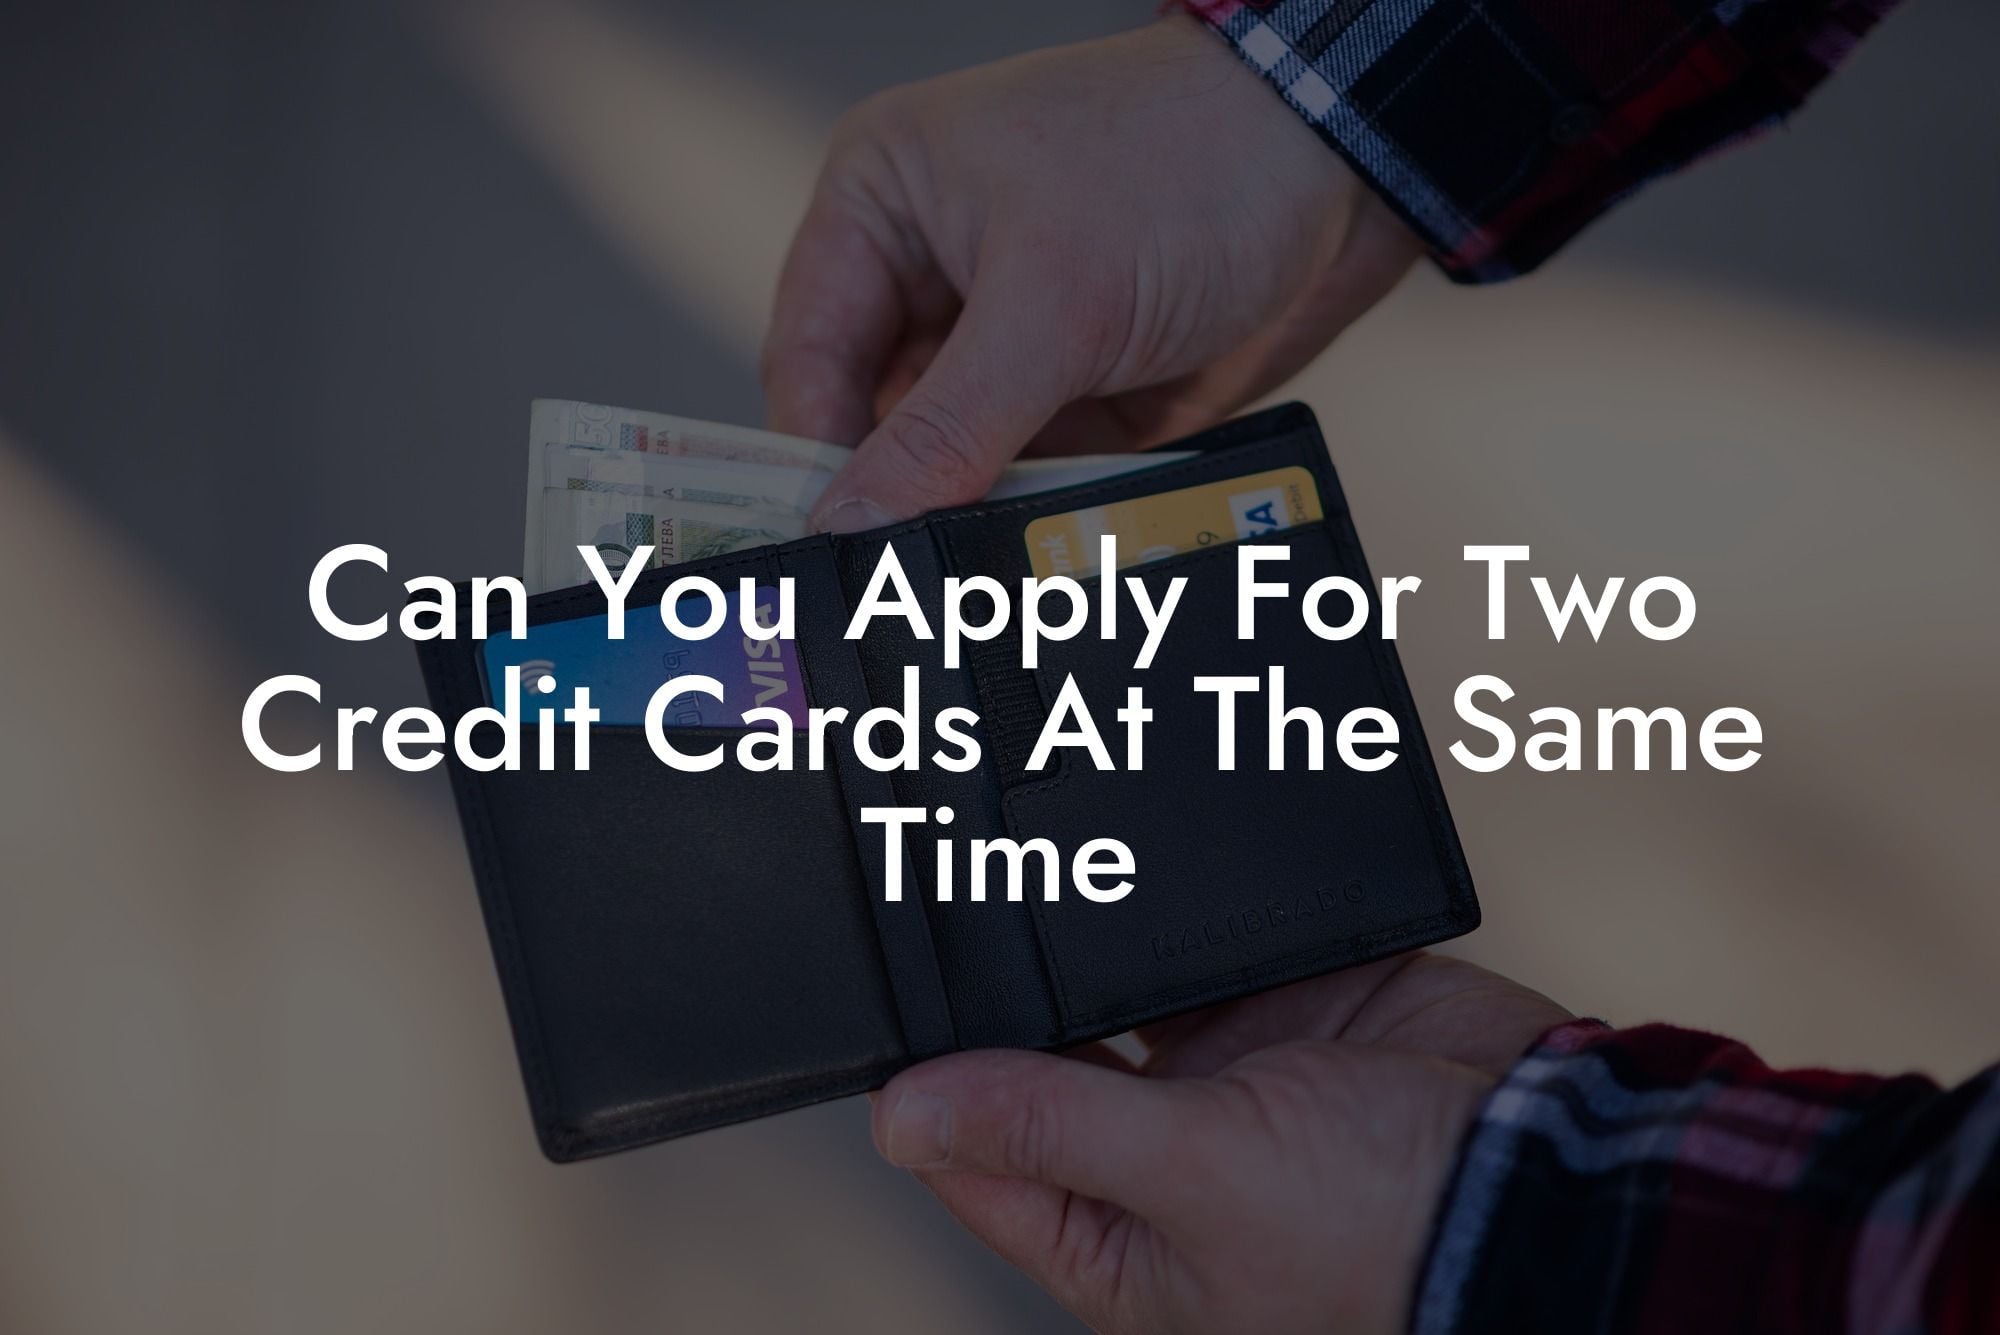 Can You Apply For Two Credit Cards At The Same Time